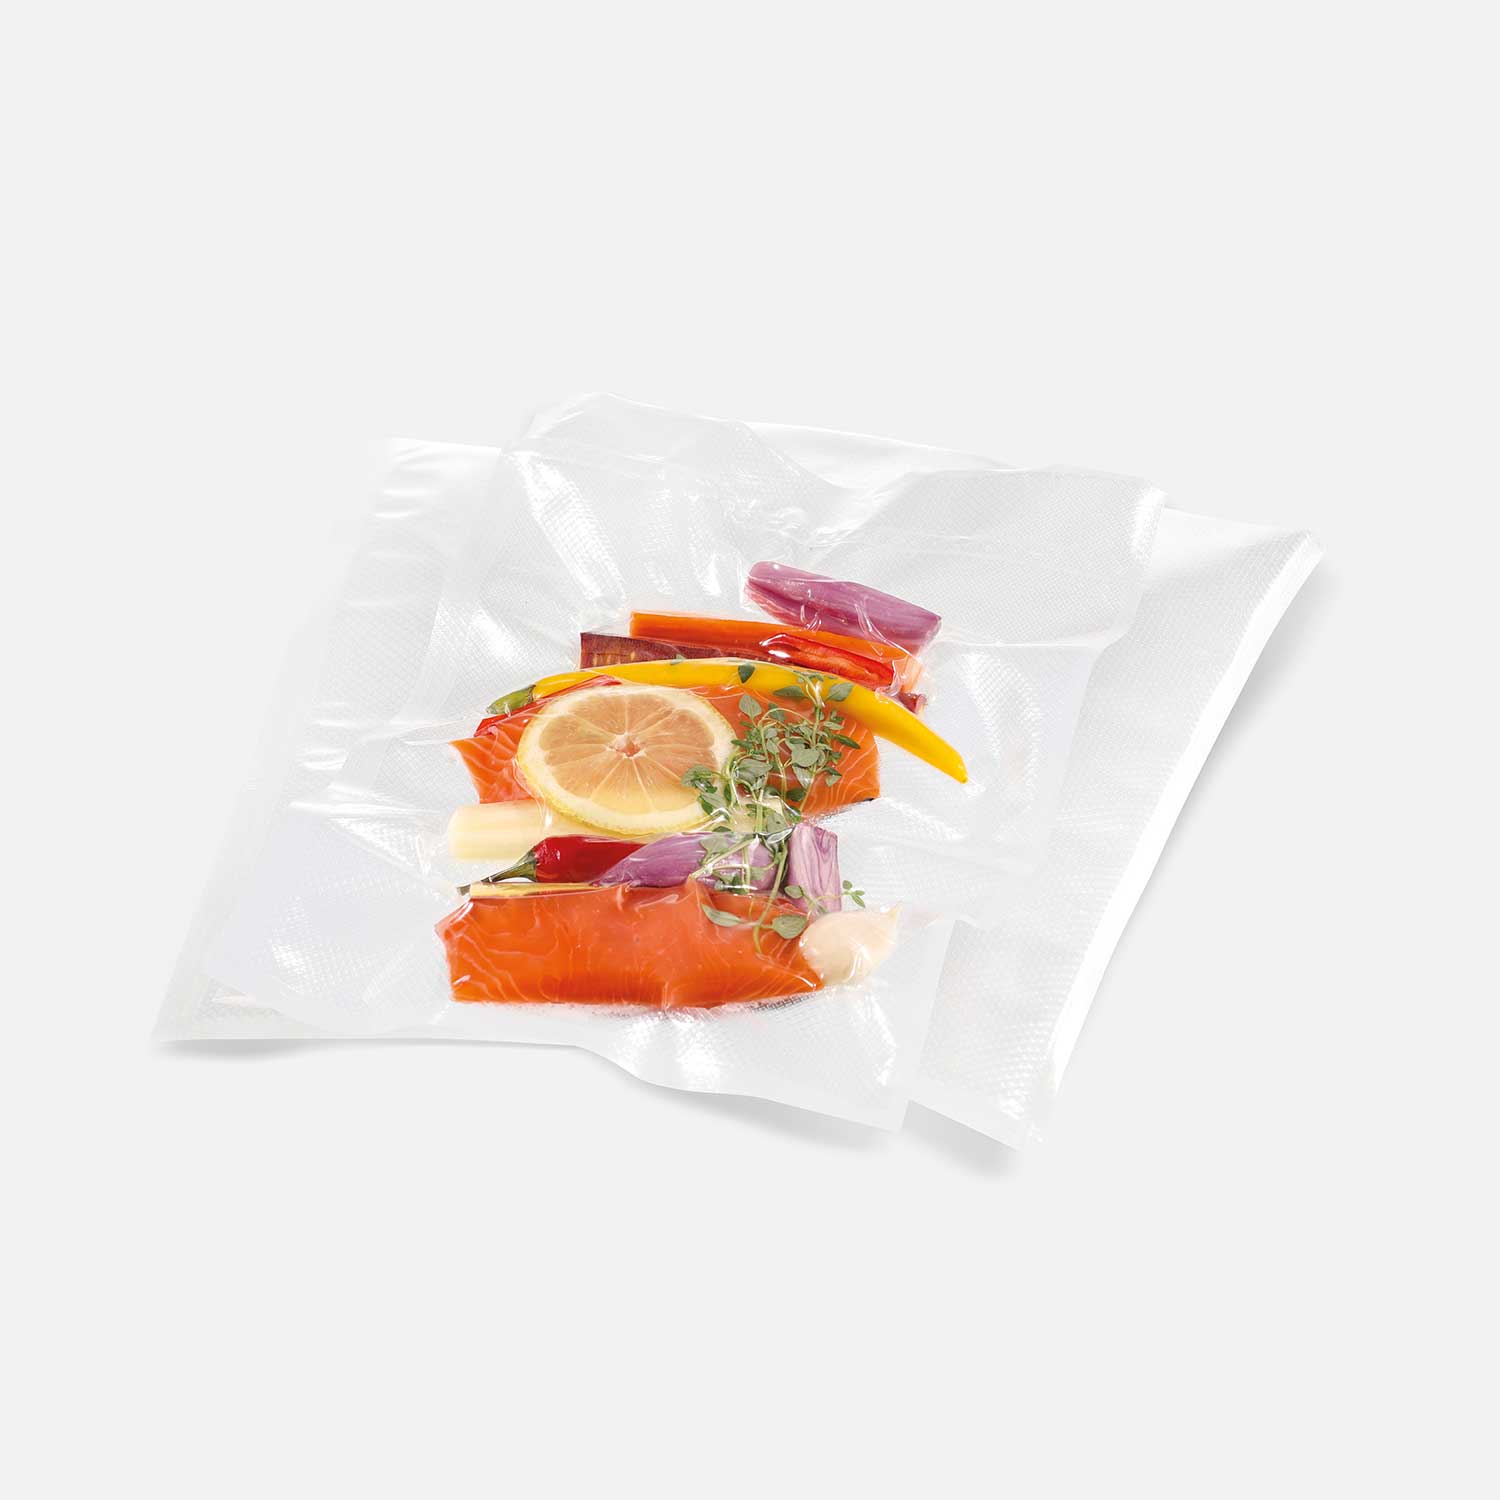 H-Vac vacuum cooking bags with food for sous-vide cooking vacuum-sealed